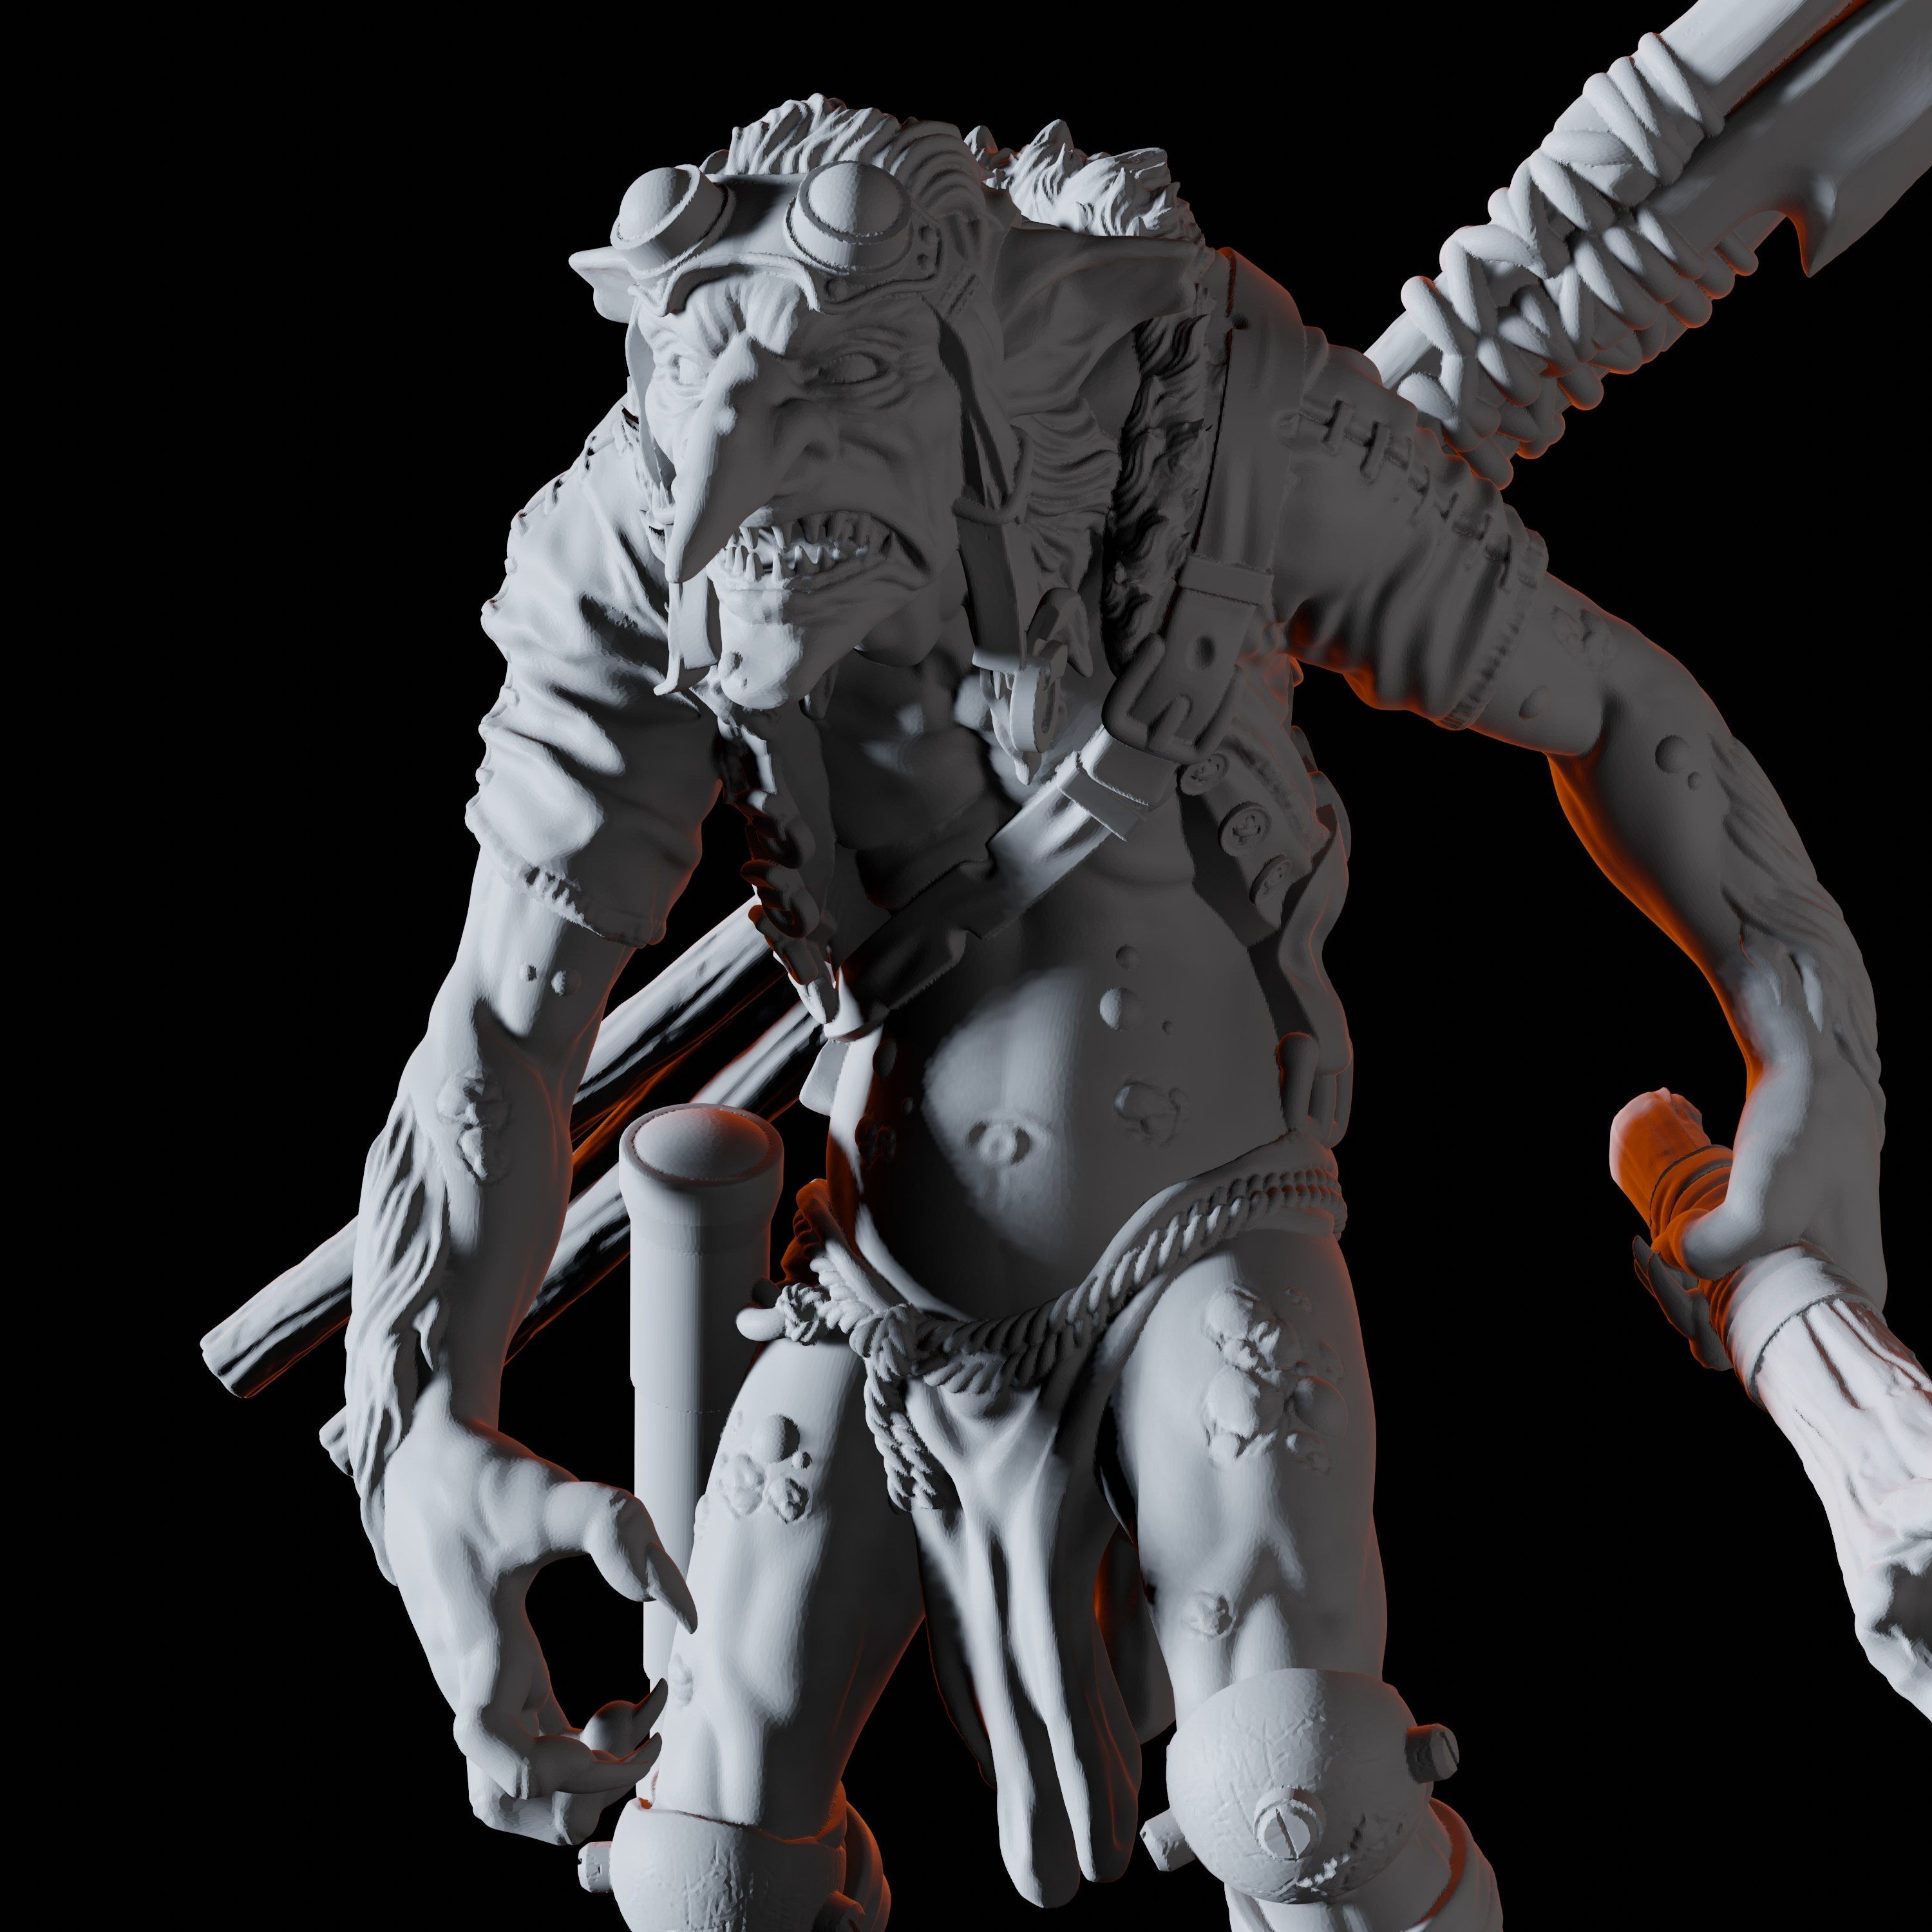 Troll Pilot Miniature for Dungeons and Dragons - Myth Forged